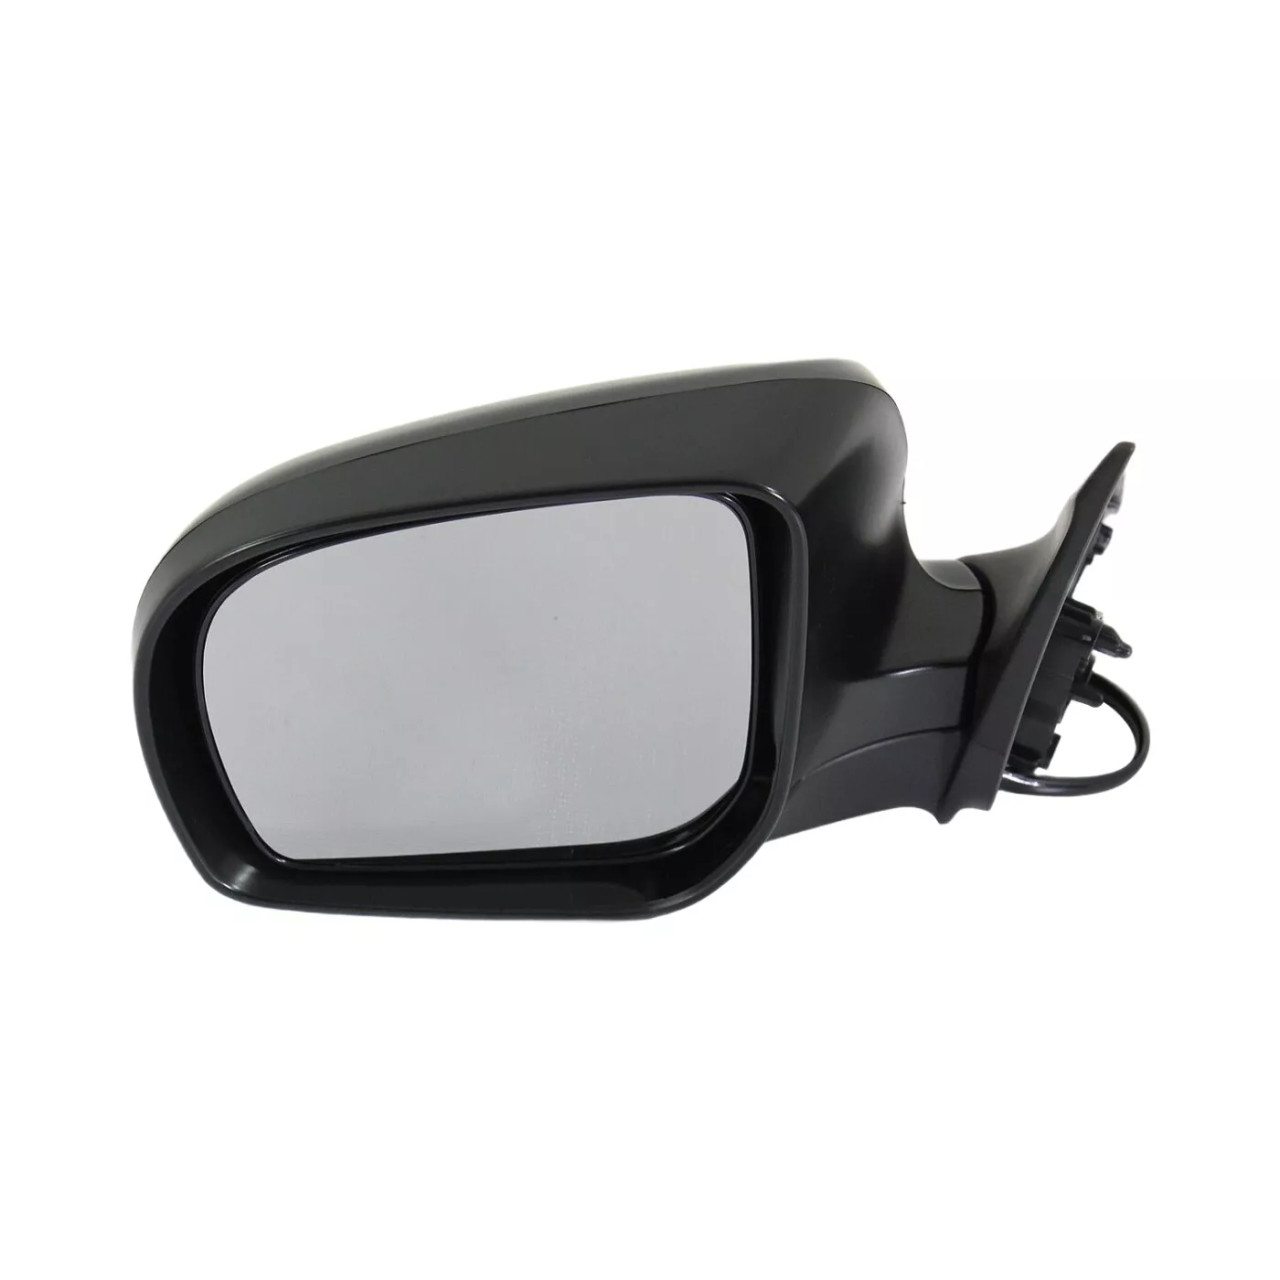 Power Mirror Set For 2011-2013 Subaru Forester Manual Folding Paintable